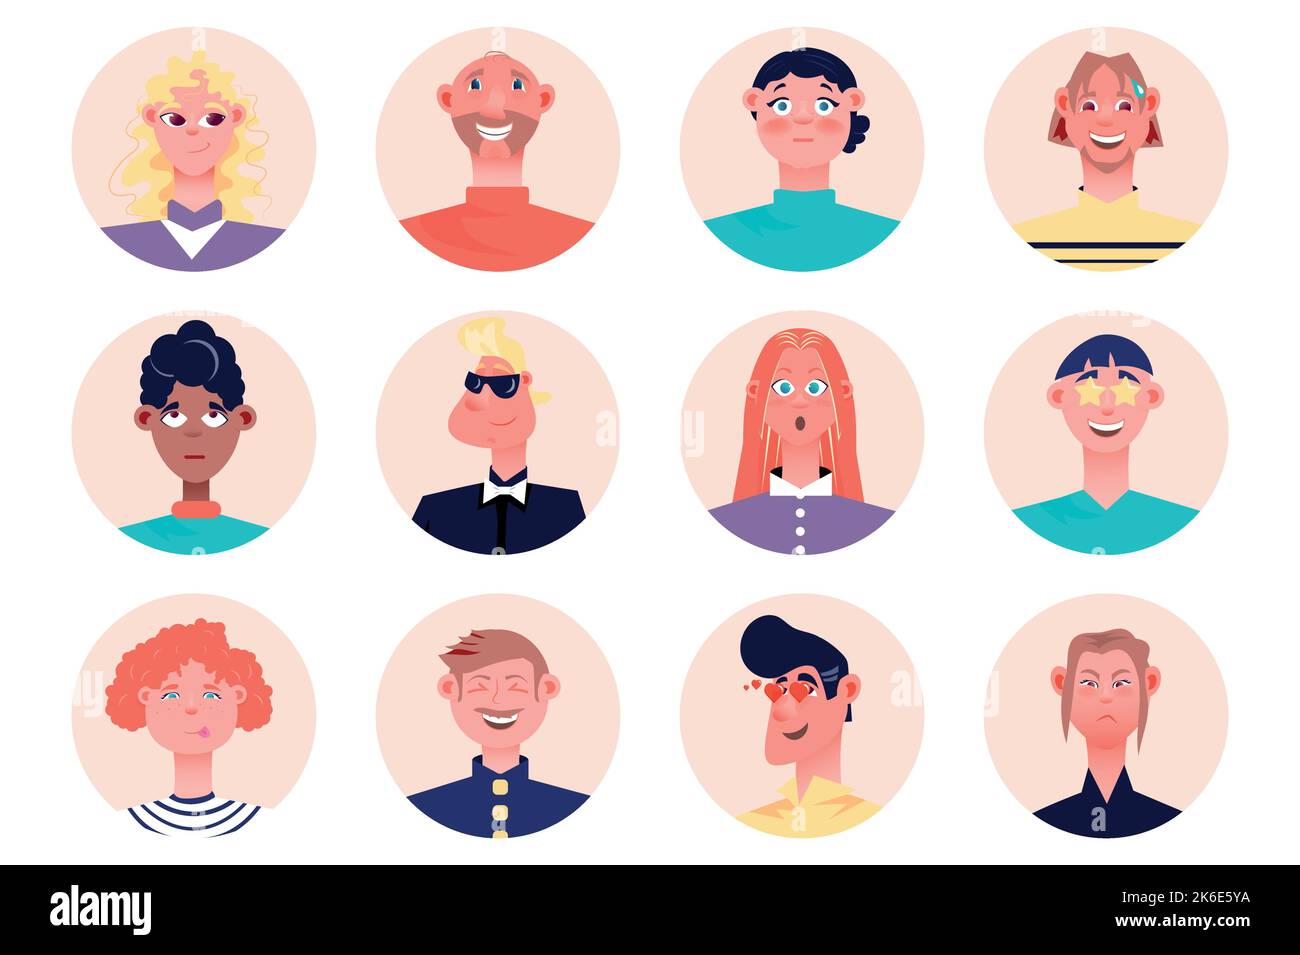 Emoji people avatars isolated set. Men and women express different facial emotions such as smile, laughter, sadness, anger, love and others. Vector Stock Vector